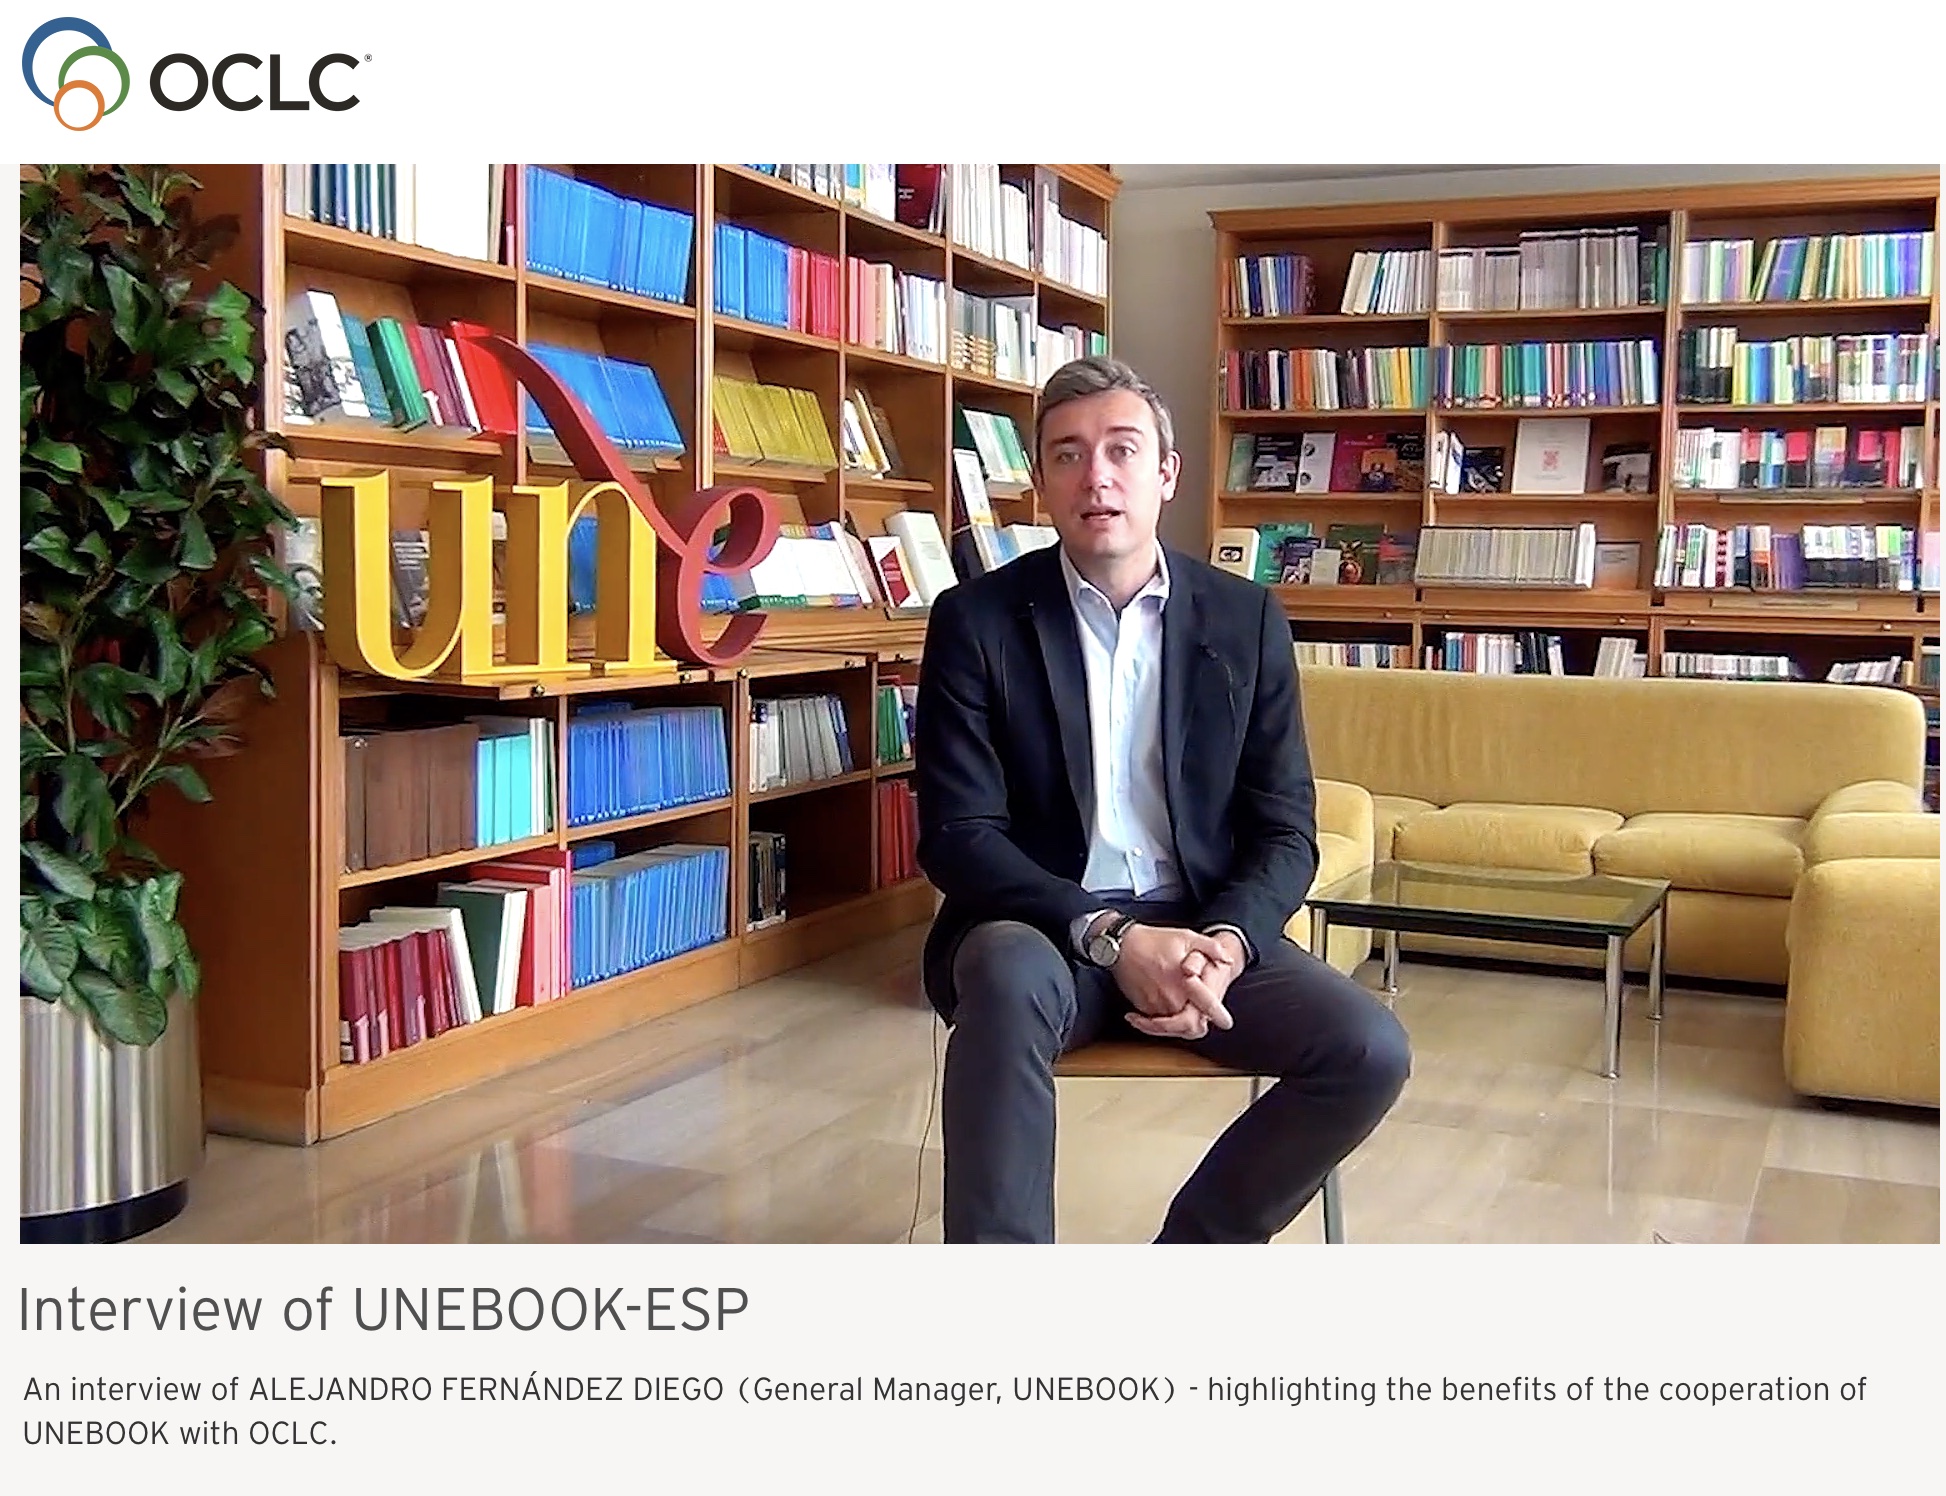 An interview of ALEJANDRO FERNÁNDEZ DIEGO (General Manager, UNEBOOK) - highlighting the benefits of the cooperation of UNEBOOK with OCLC.